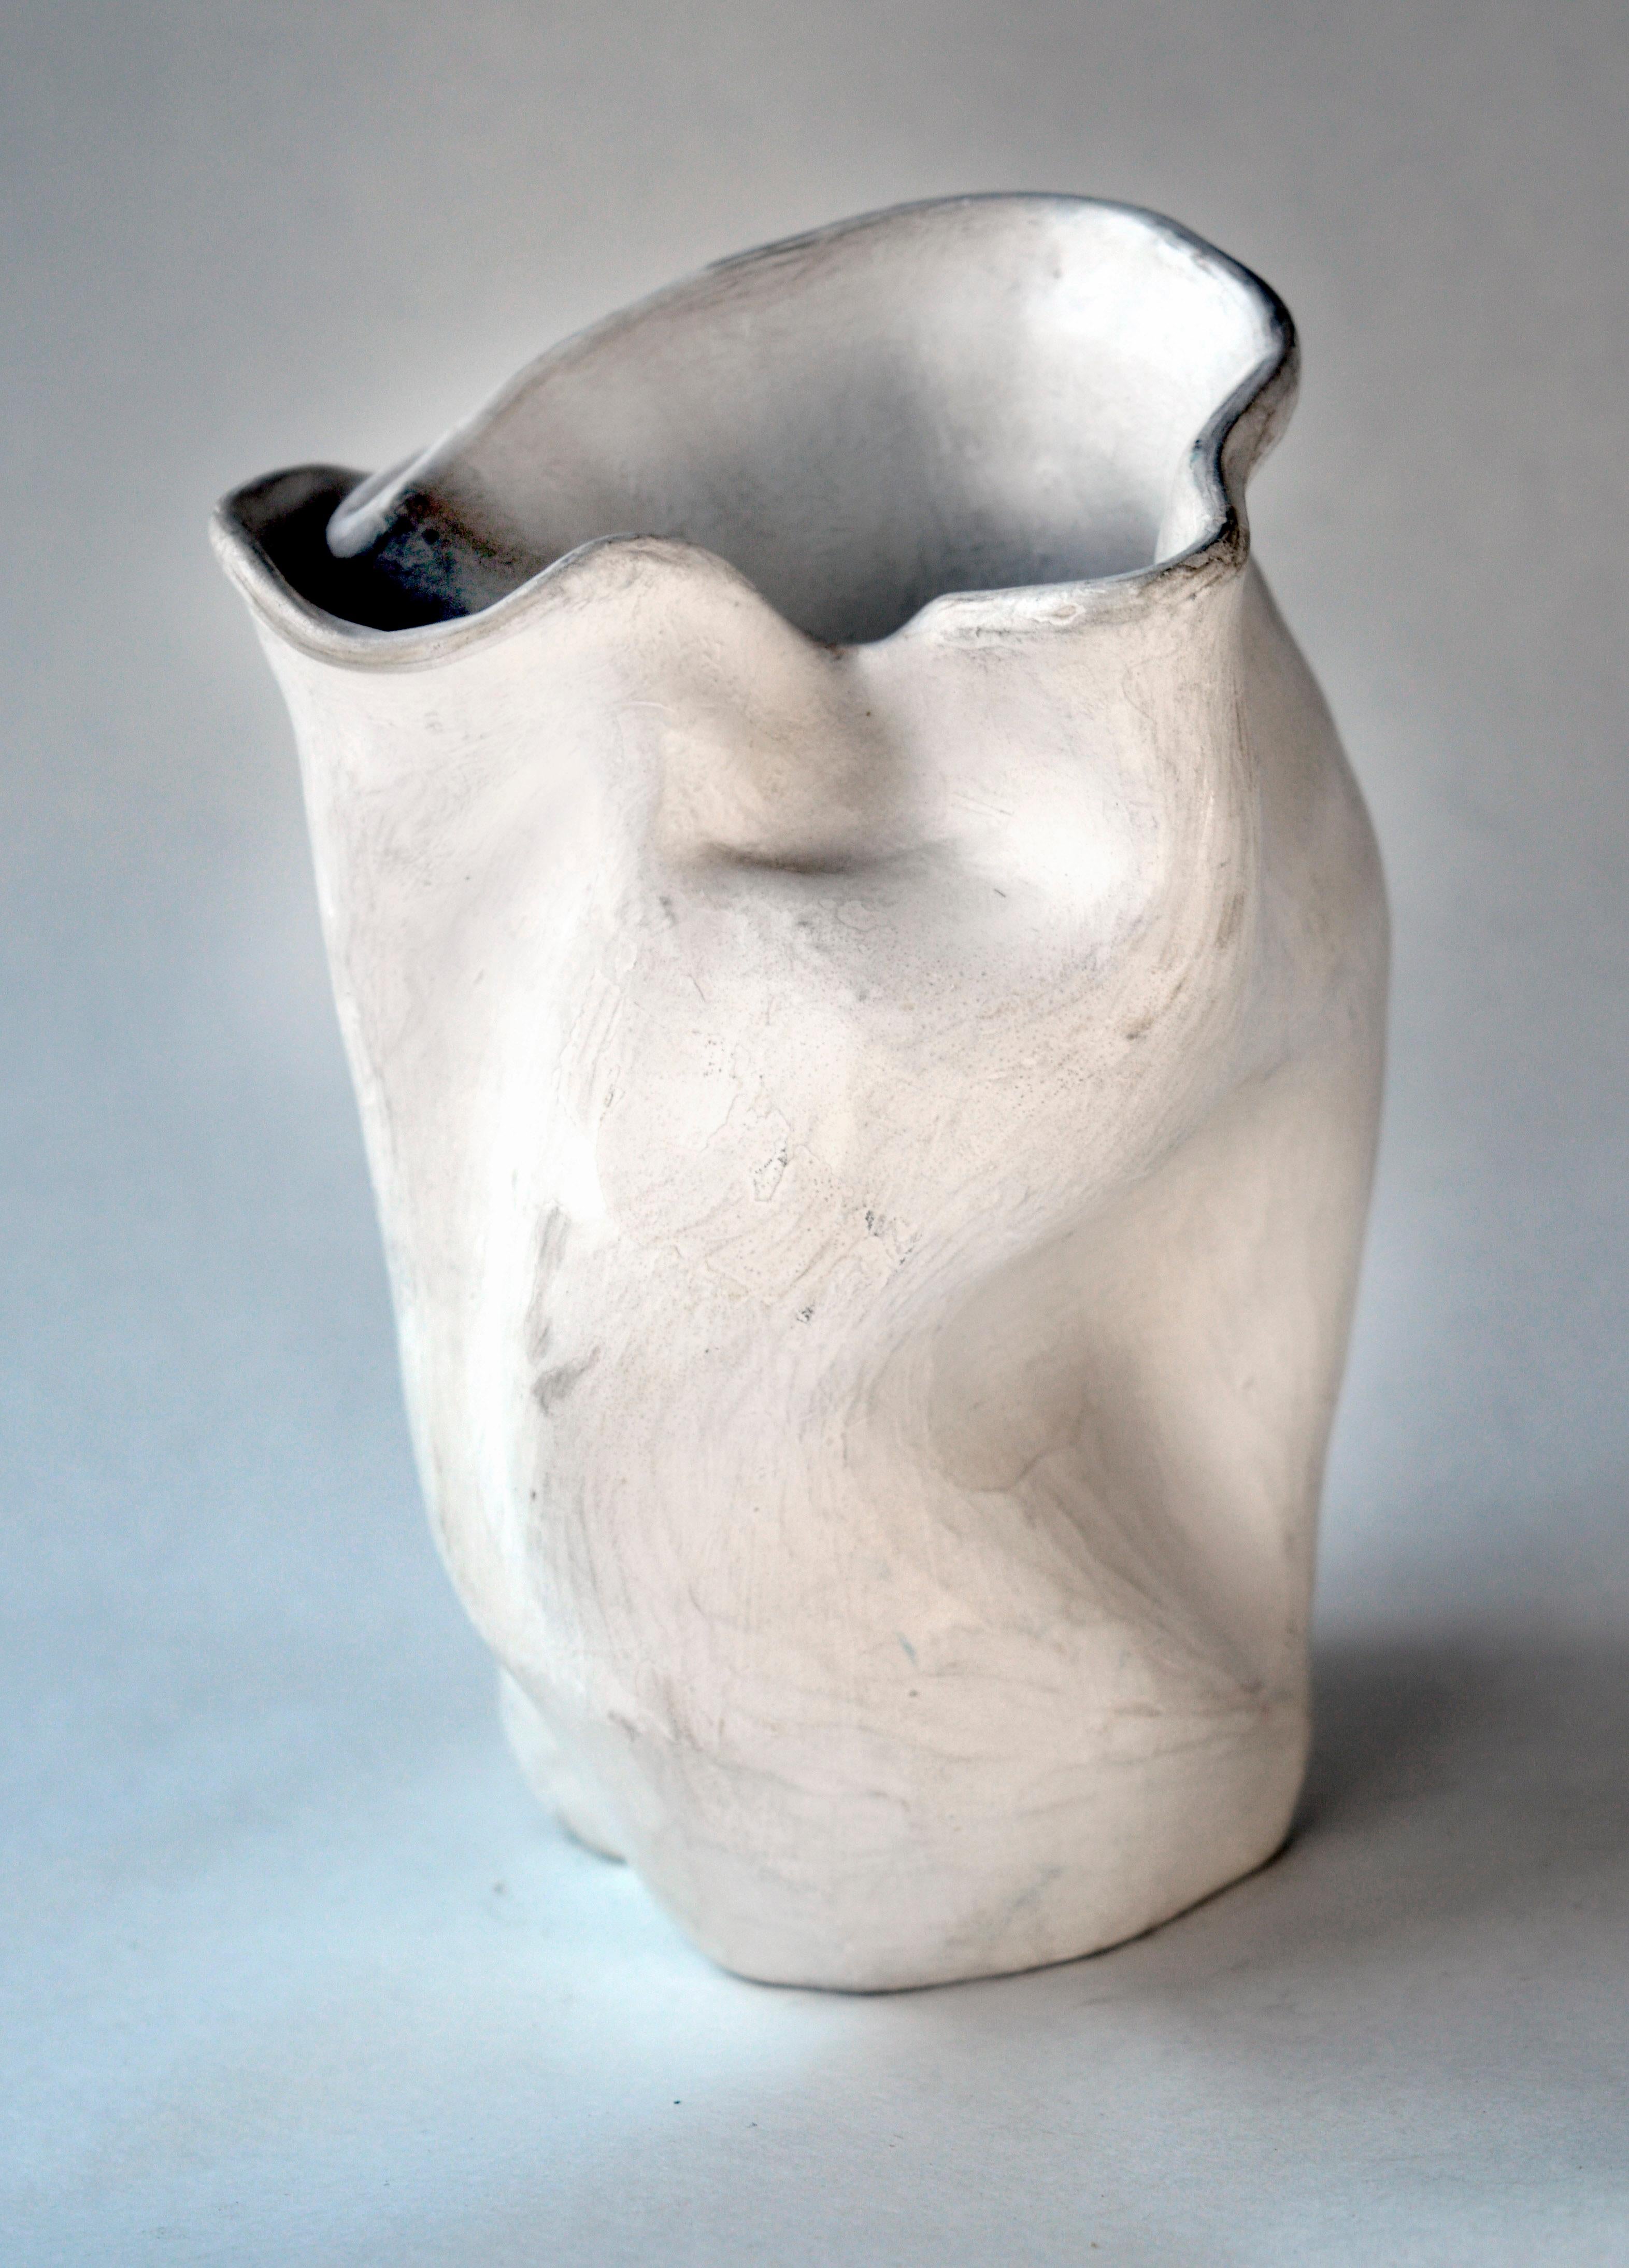 Early 1940s Abstract Pottery Vase #2 after George Ohr - Sculpture by Hamilton Achille Wolf